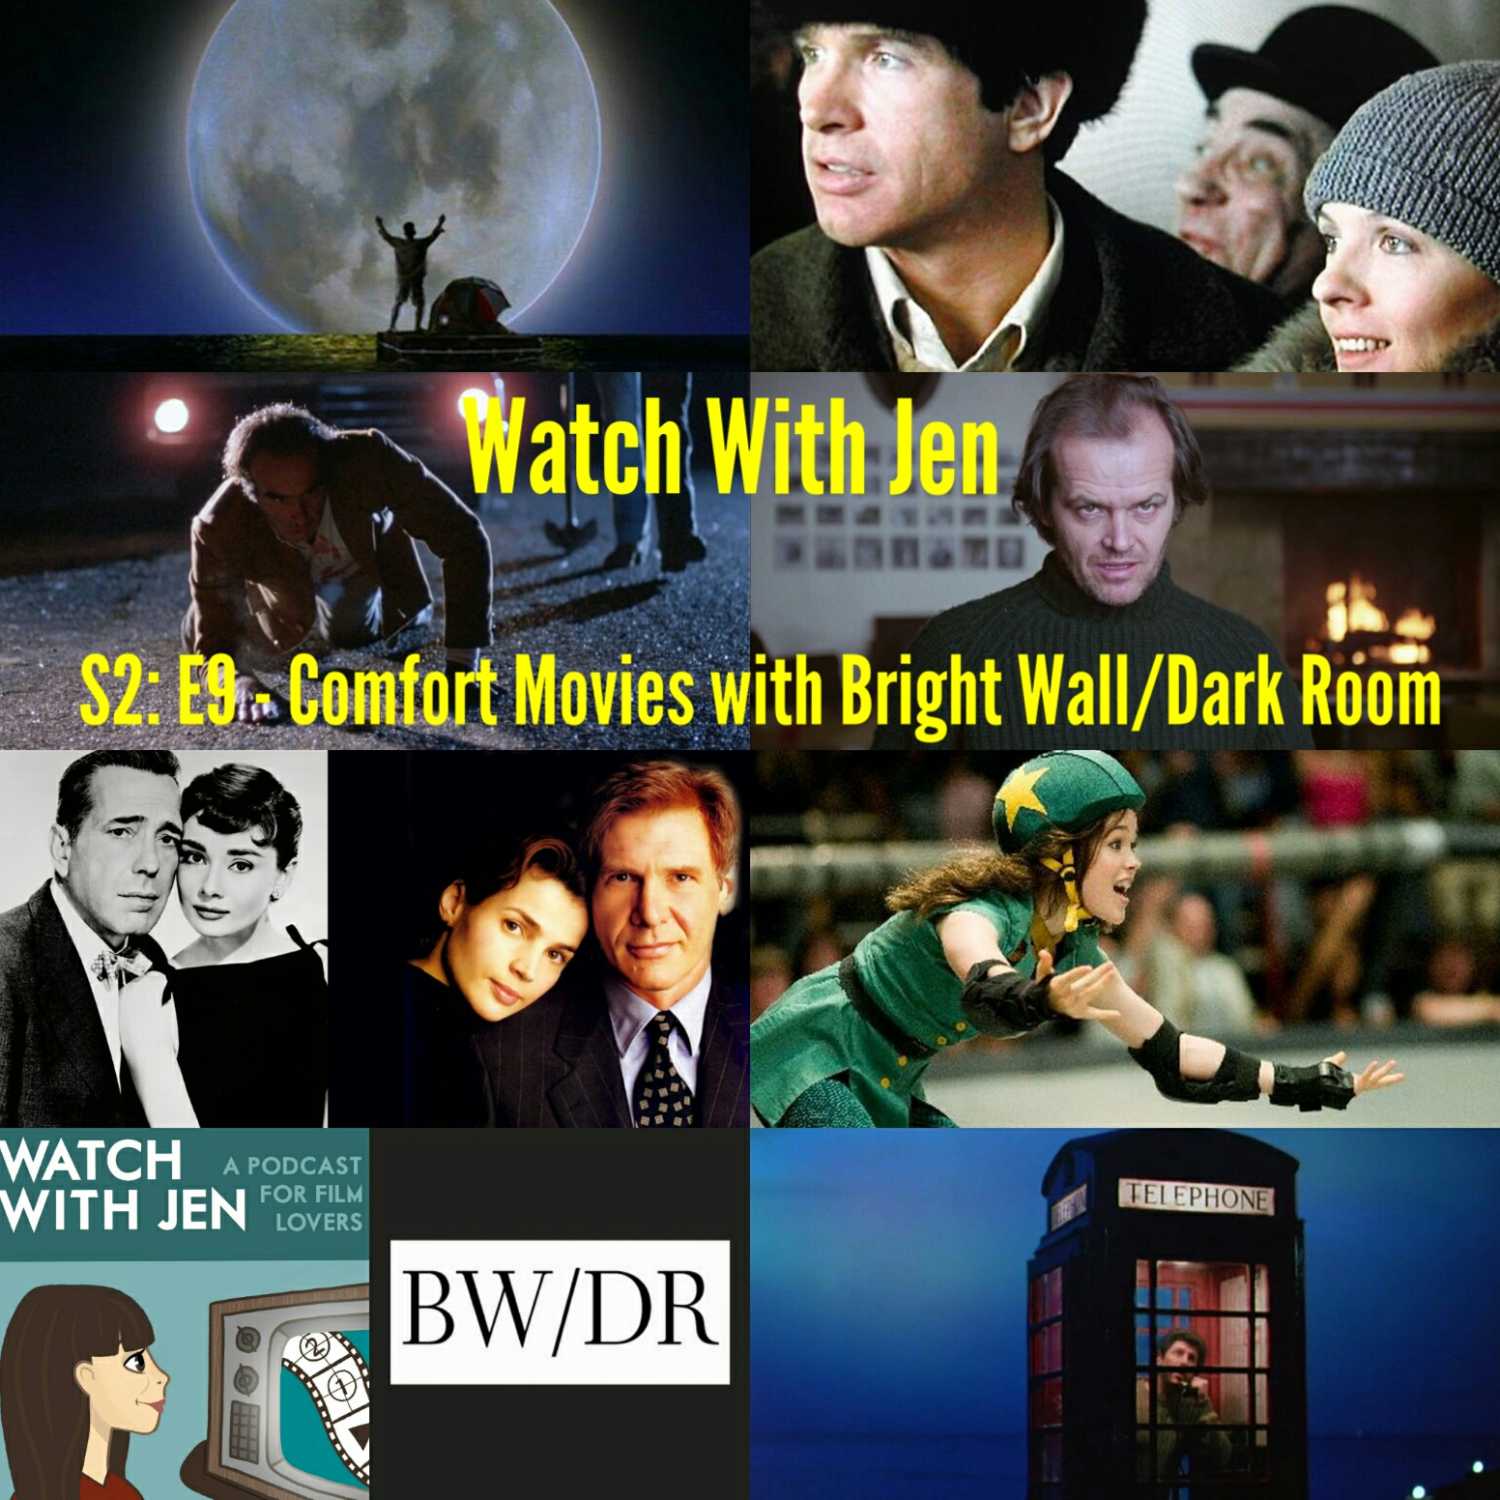 Watch With Jen - S2: E9 - Comfort Movies with Bright Wall/Dark Room